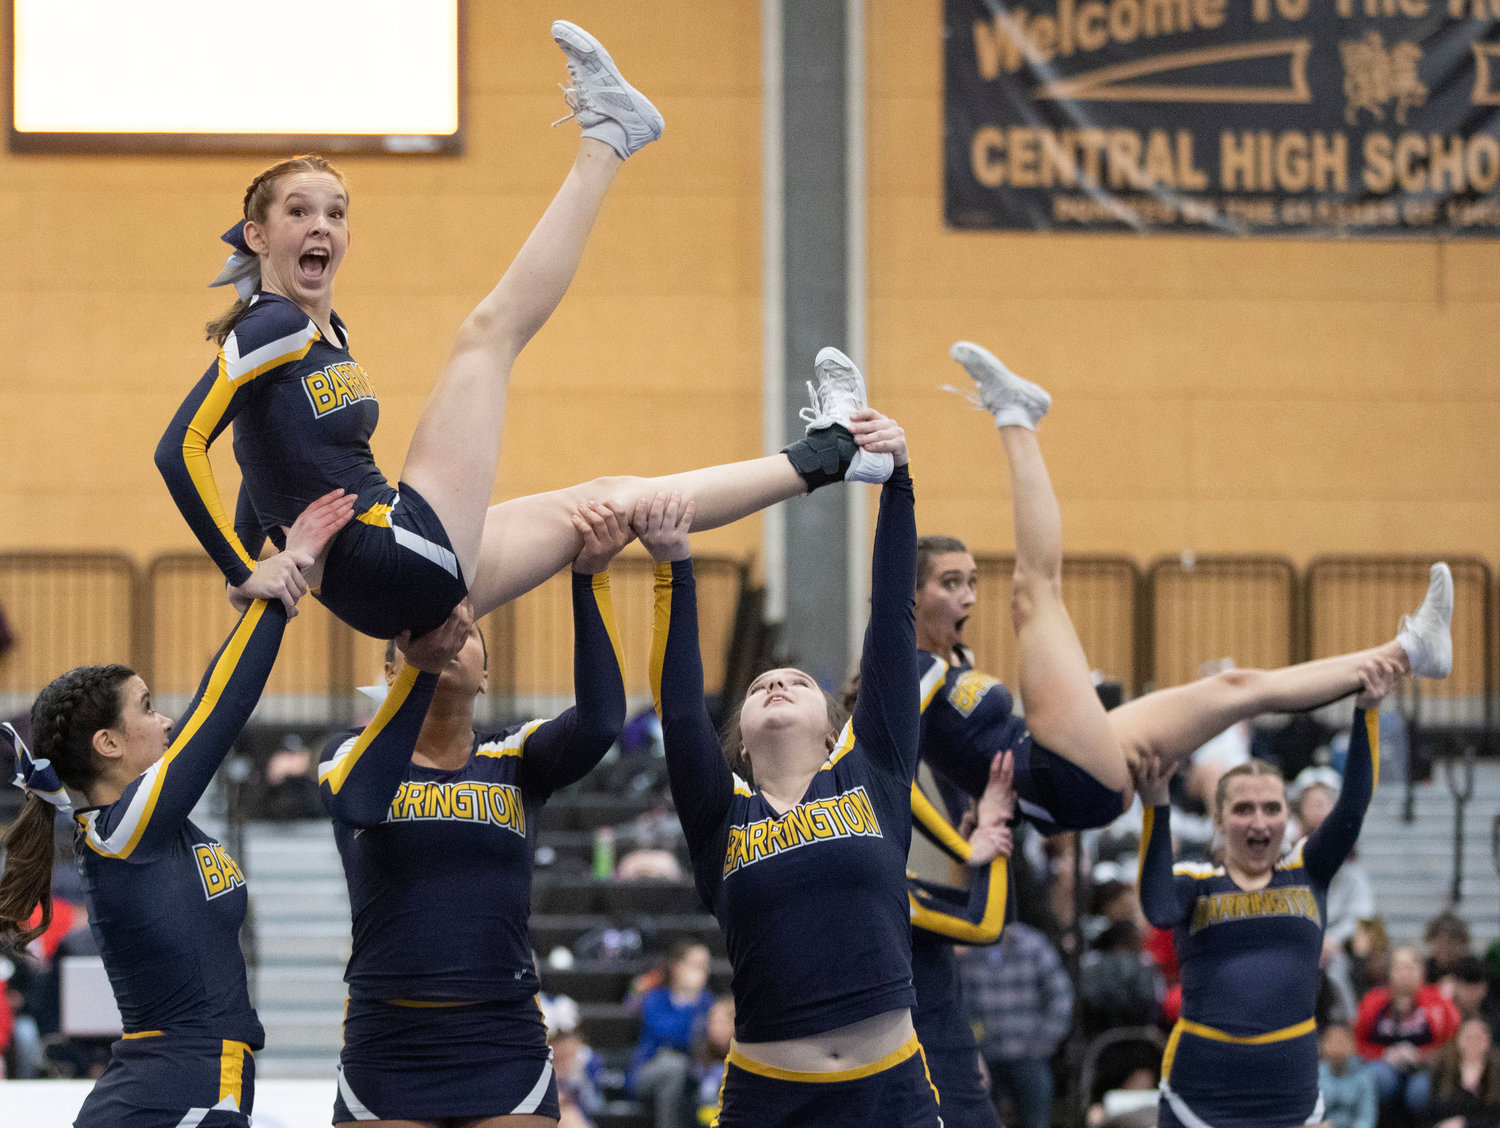 Teammates lift Morgane Seadale during a stunt at the Rhode Island Interscholastic League Division II Cheer Competition.